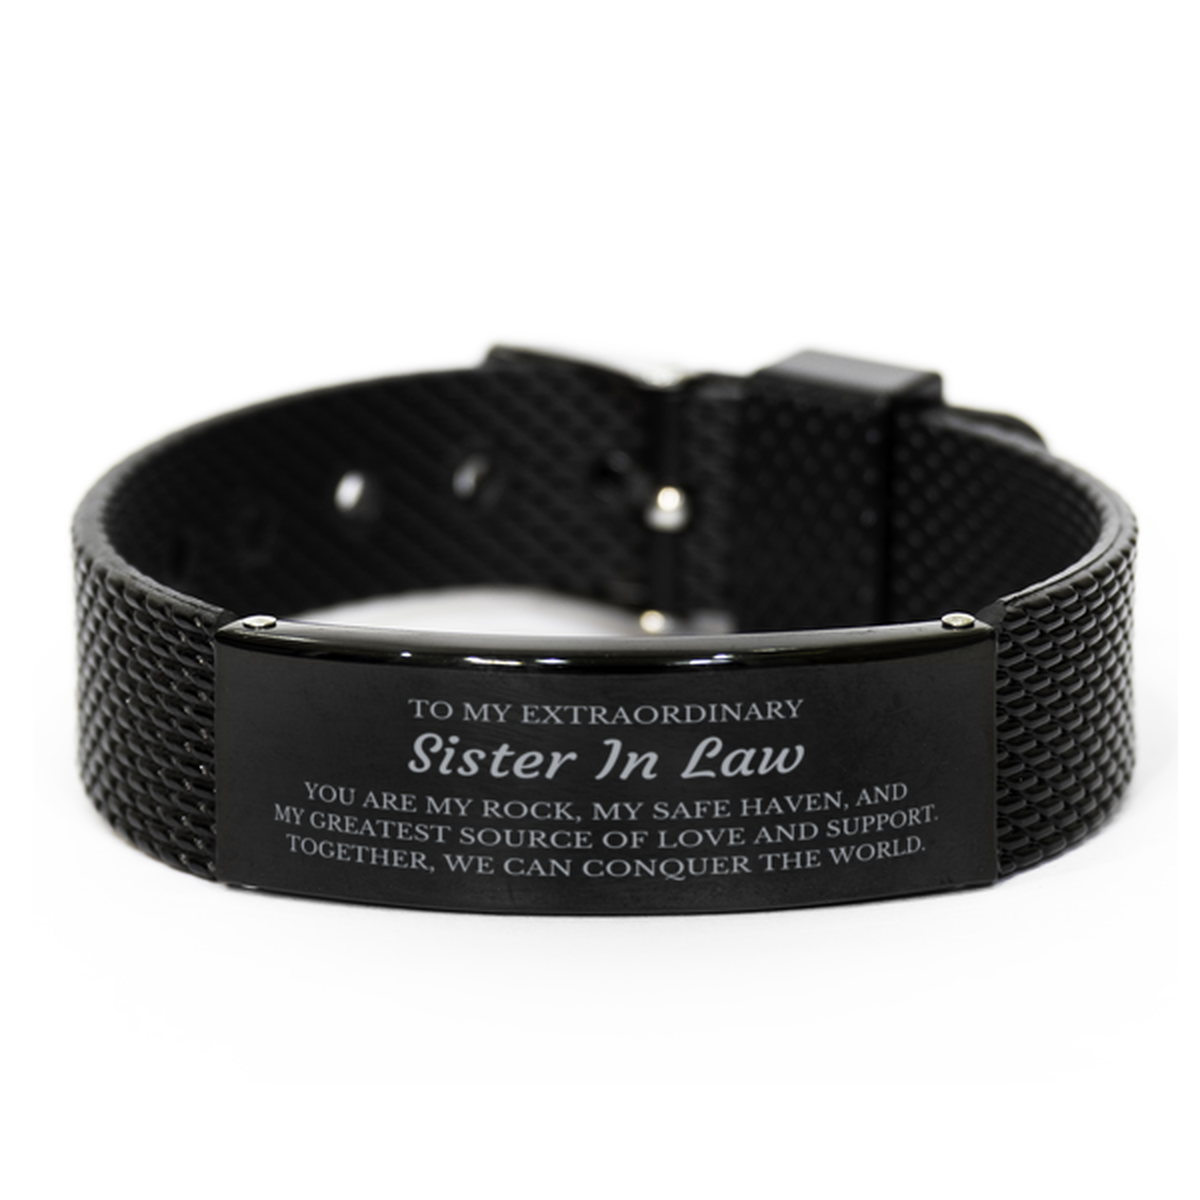 To My Extraordinary Sister In Law Gifts, Together, we can conquer the world, Birthday Black Shark Mesh Bracelet For Sister In Law, Christmas Gifts For Sister In Law